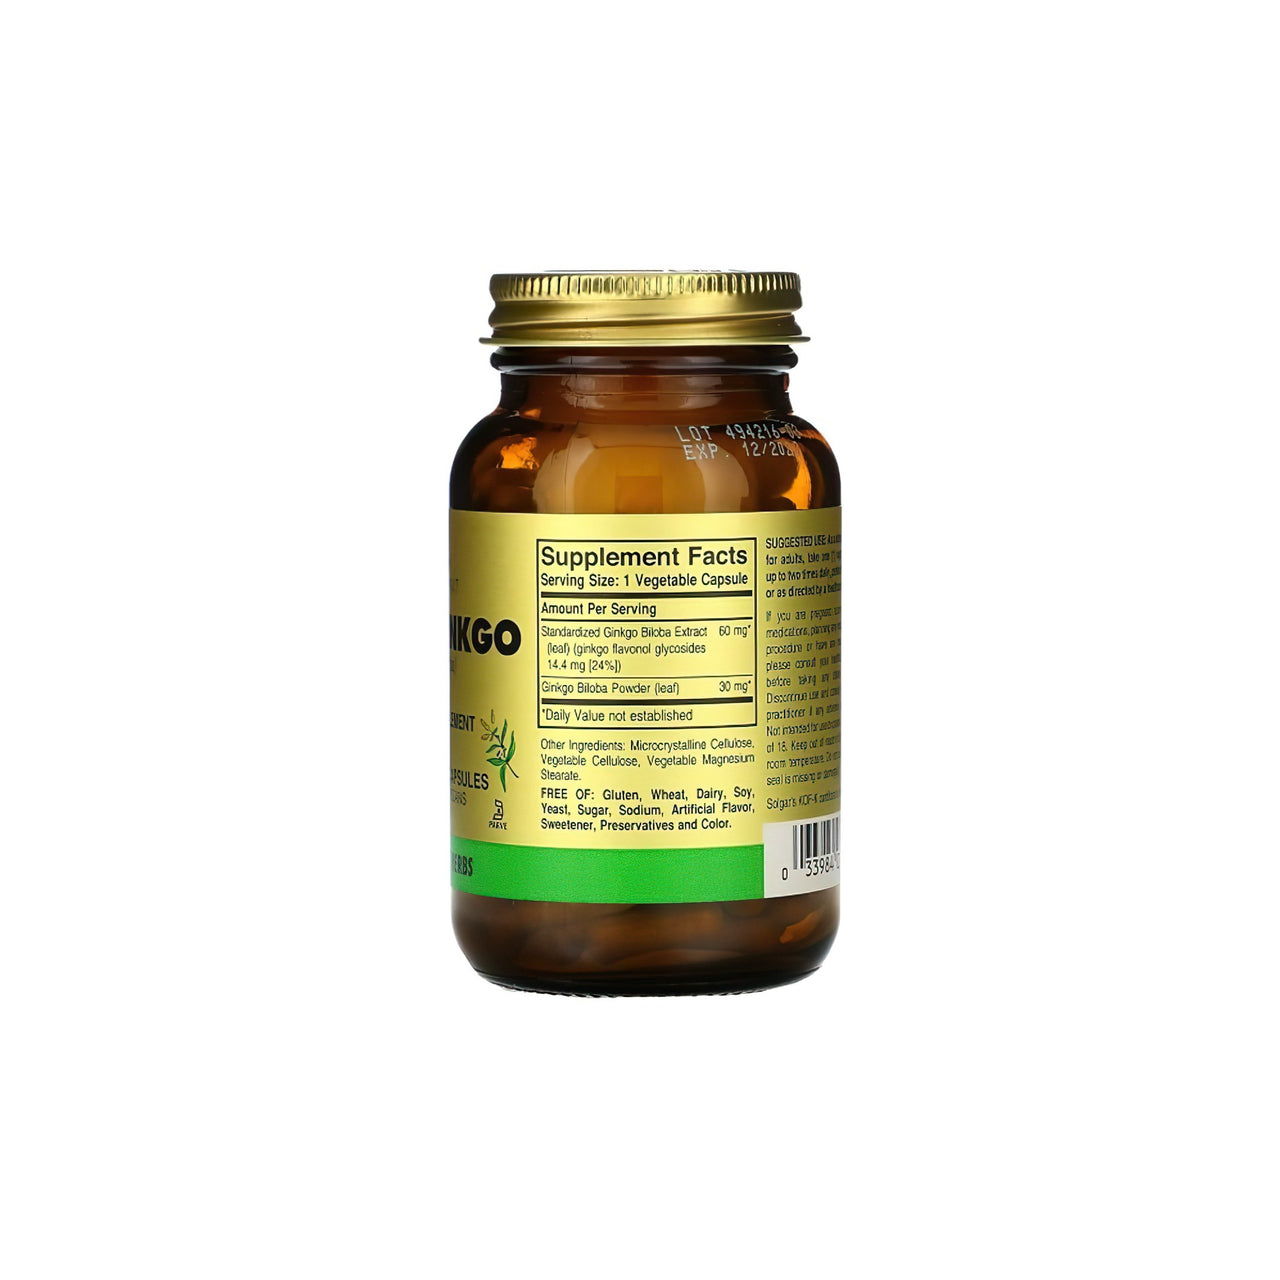 A Solgar dietary supplement, Super Ginkgo Biloba 60 mg 60 vege capsules, on a white background.